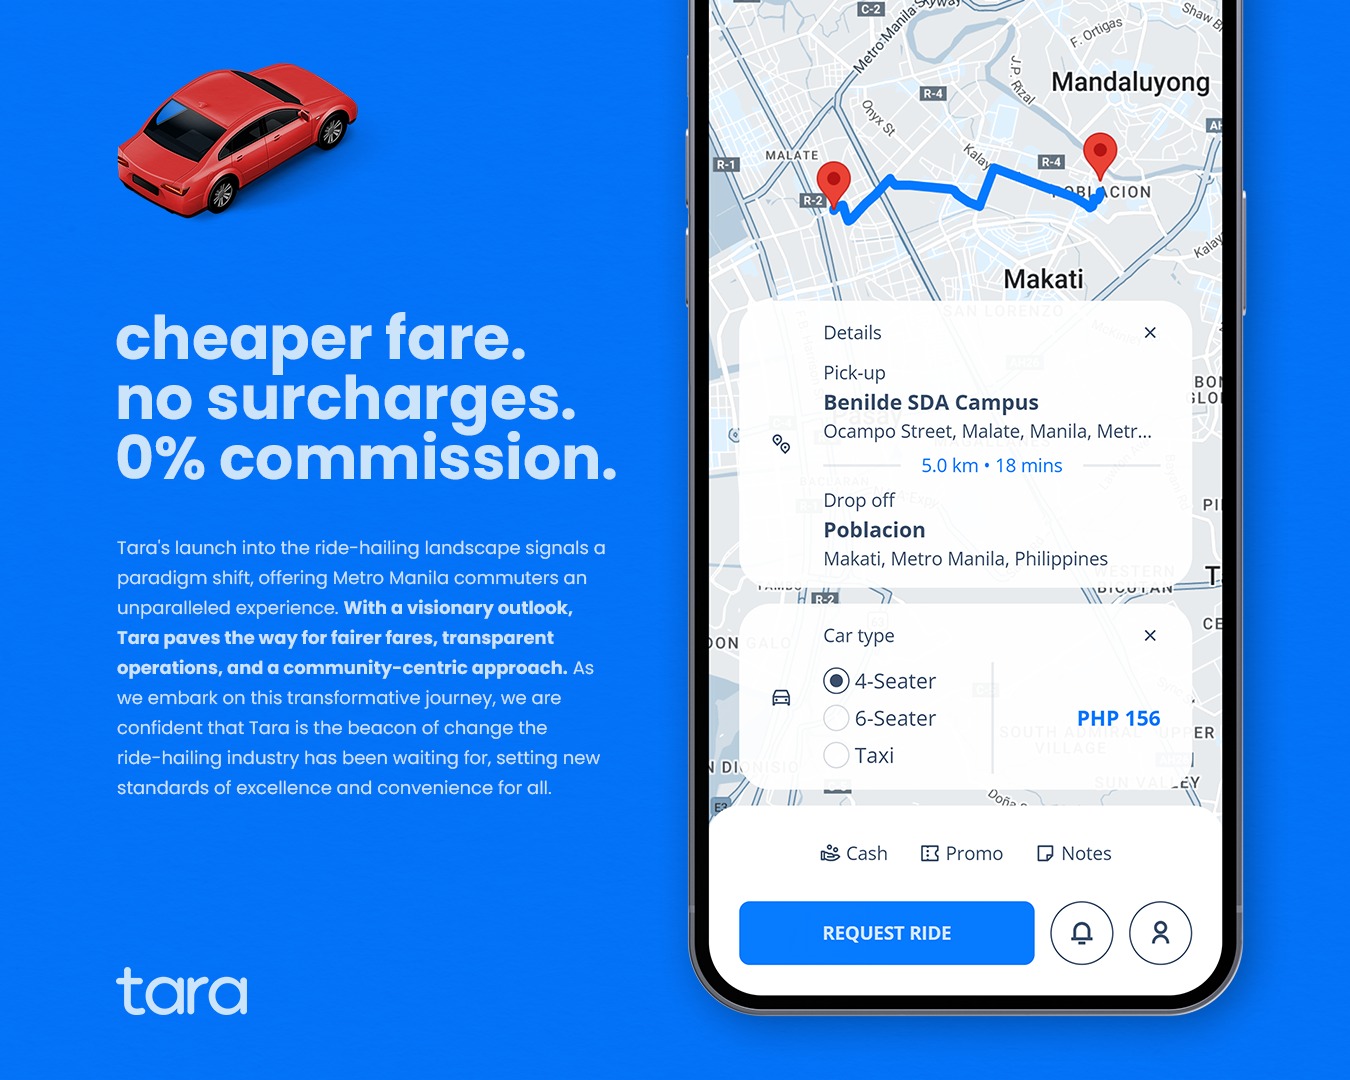 Tara - transparency for drivers and passengers